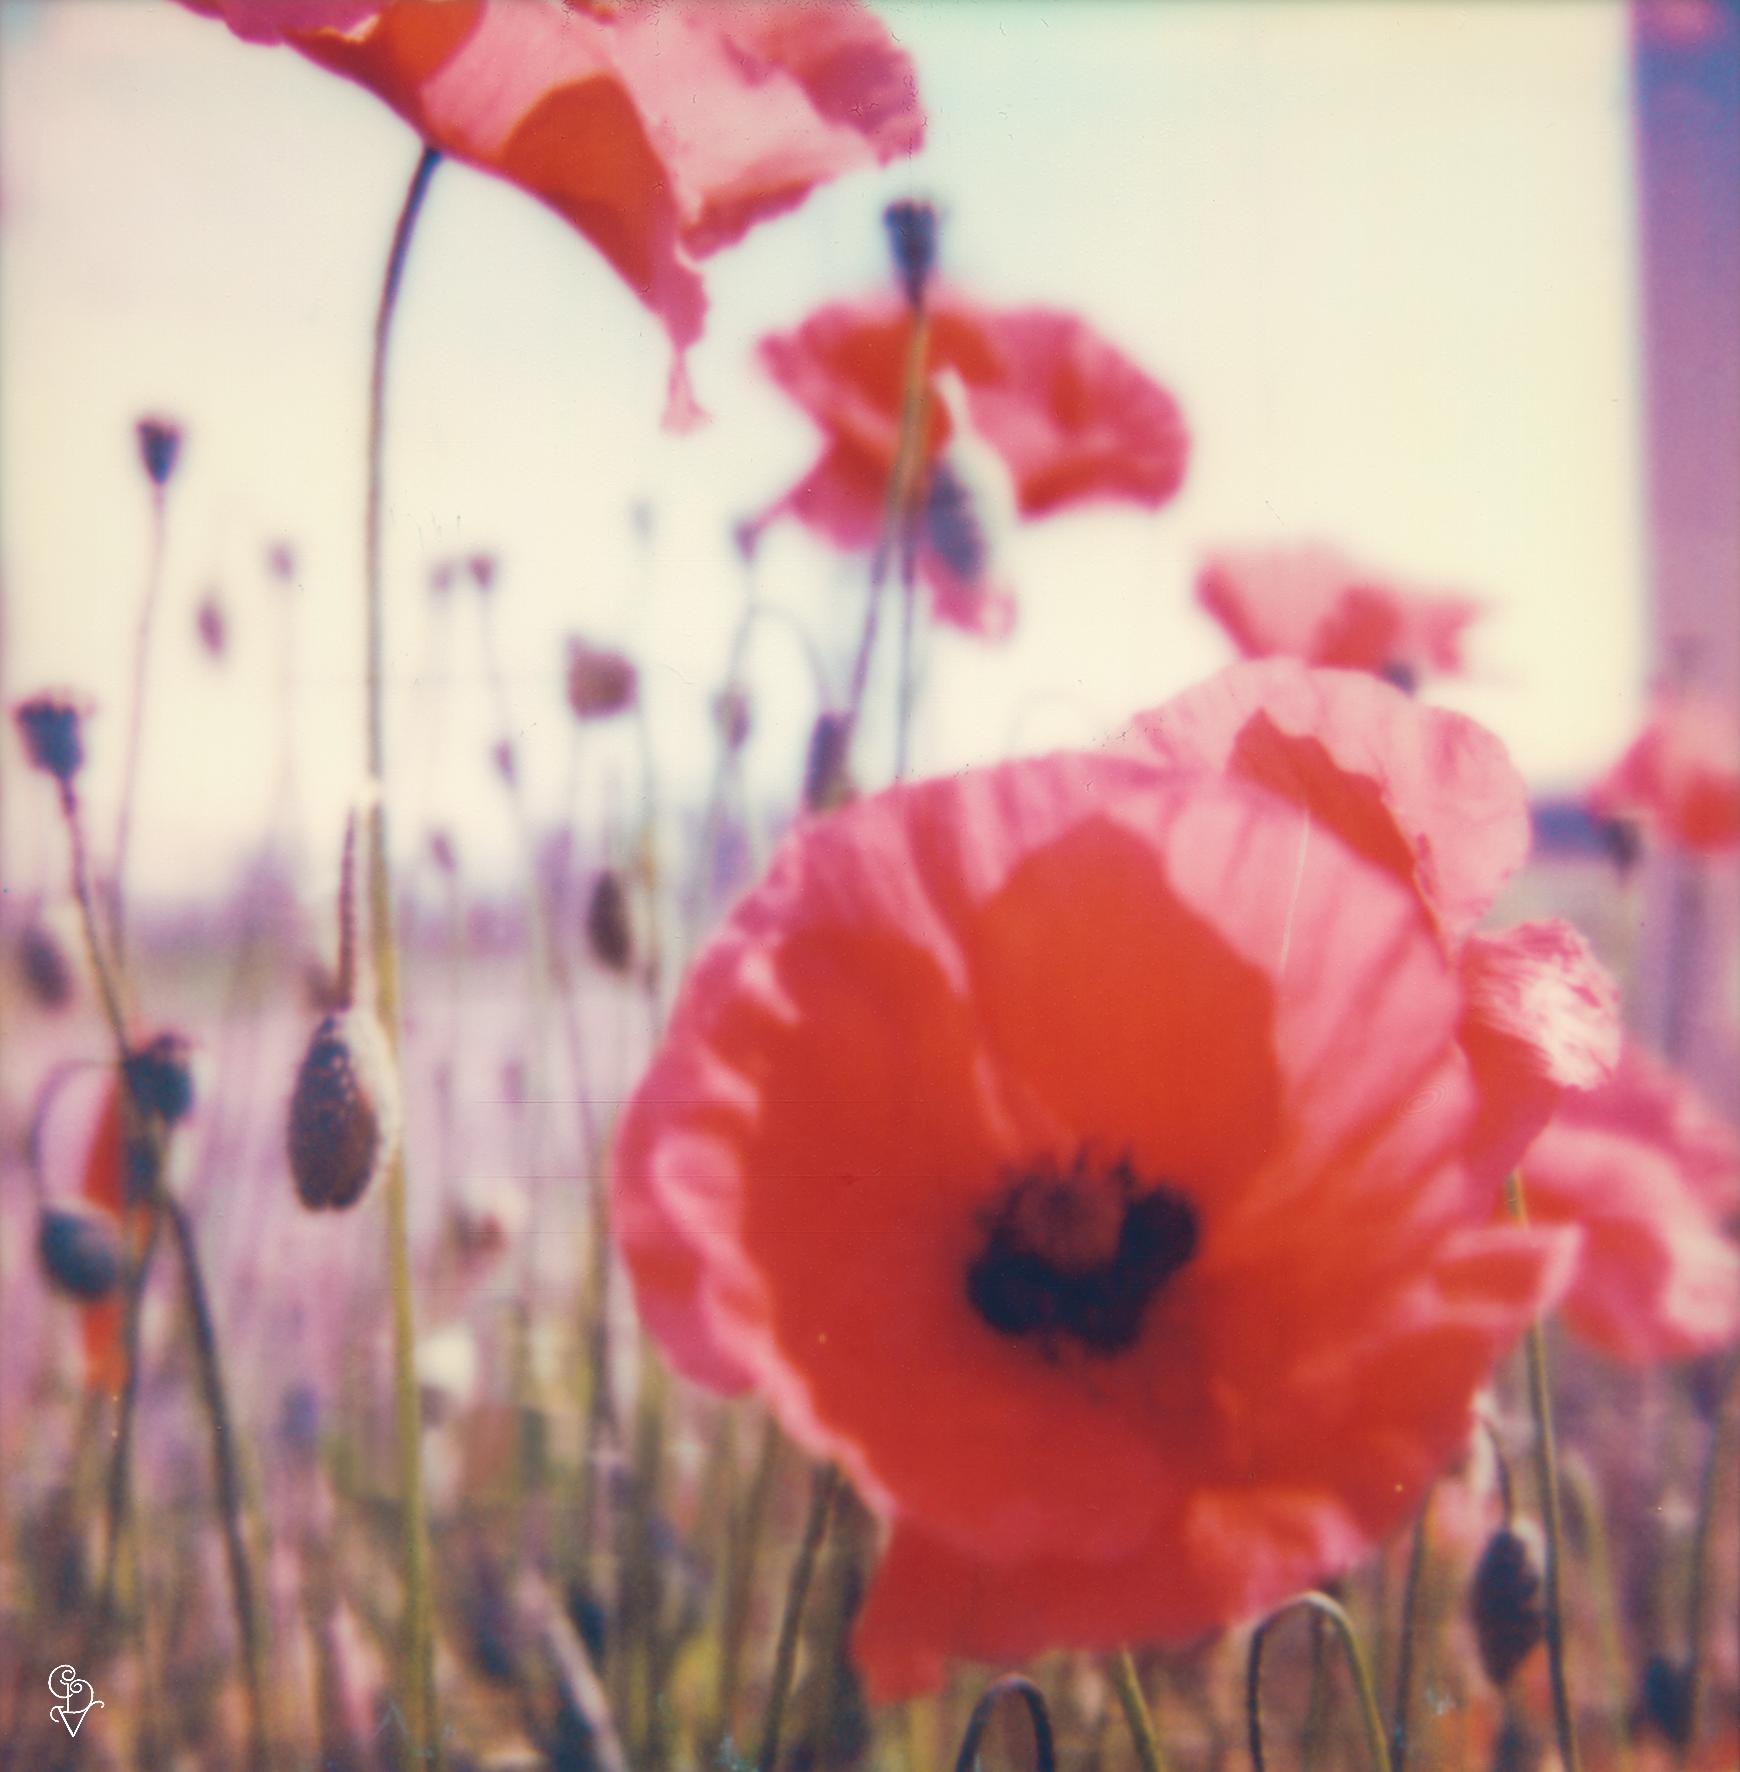 Carmen de Vos Landscape Photograph - Poppy Realm #04 [From the series Wild Things]